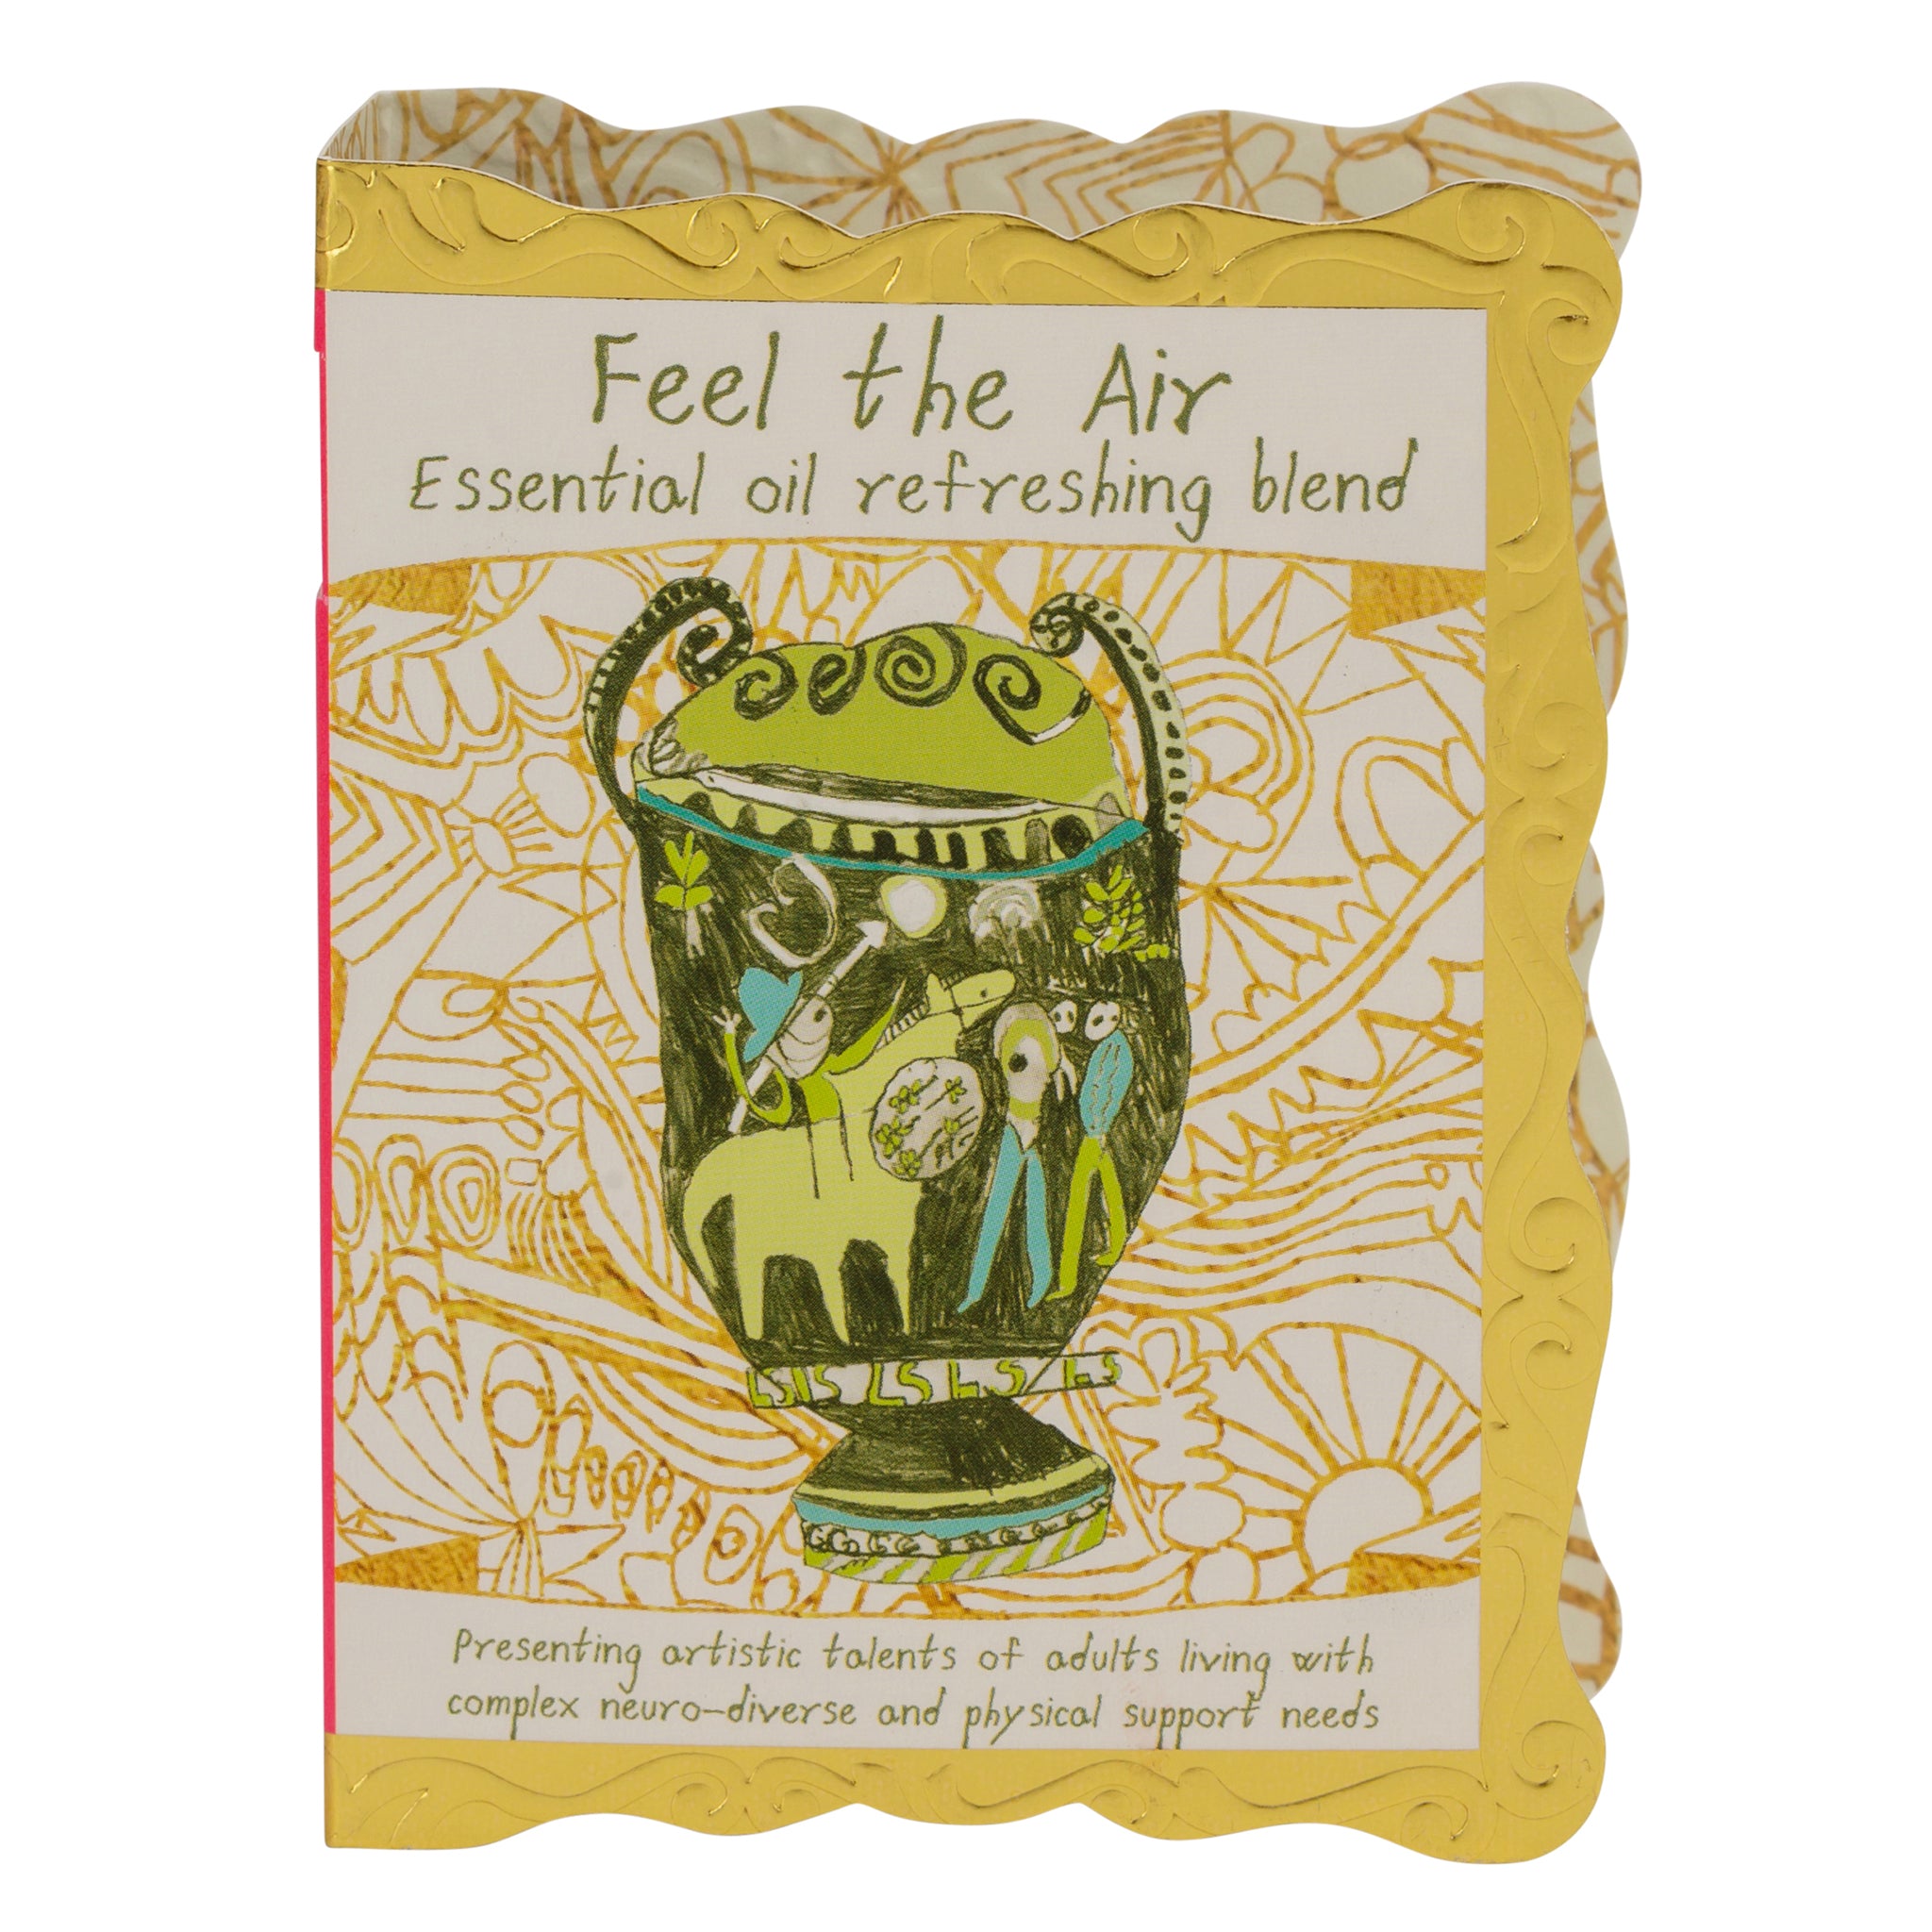 Green and gold packet of Feel The Air, Well Being Essential Oil, Refreshing Blend